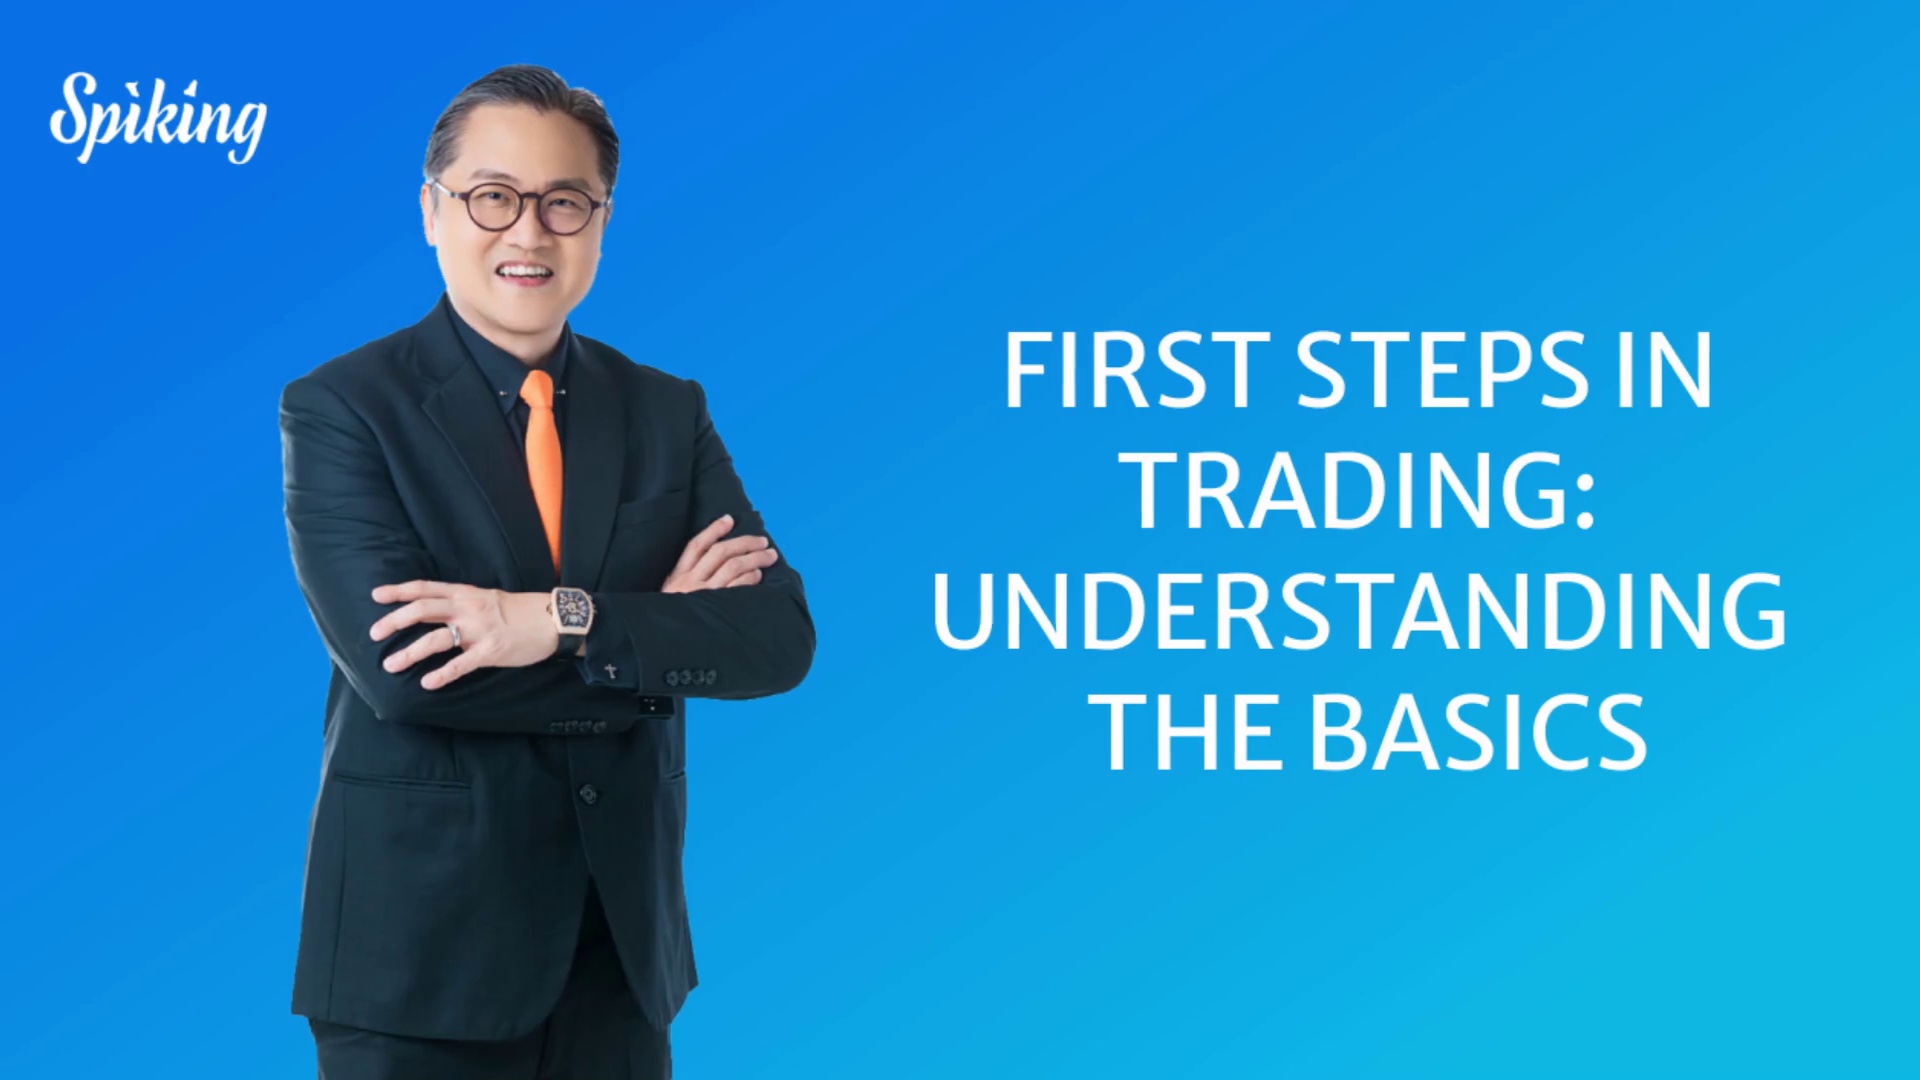 First Steps in Trading: Understanding the Basics